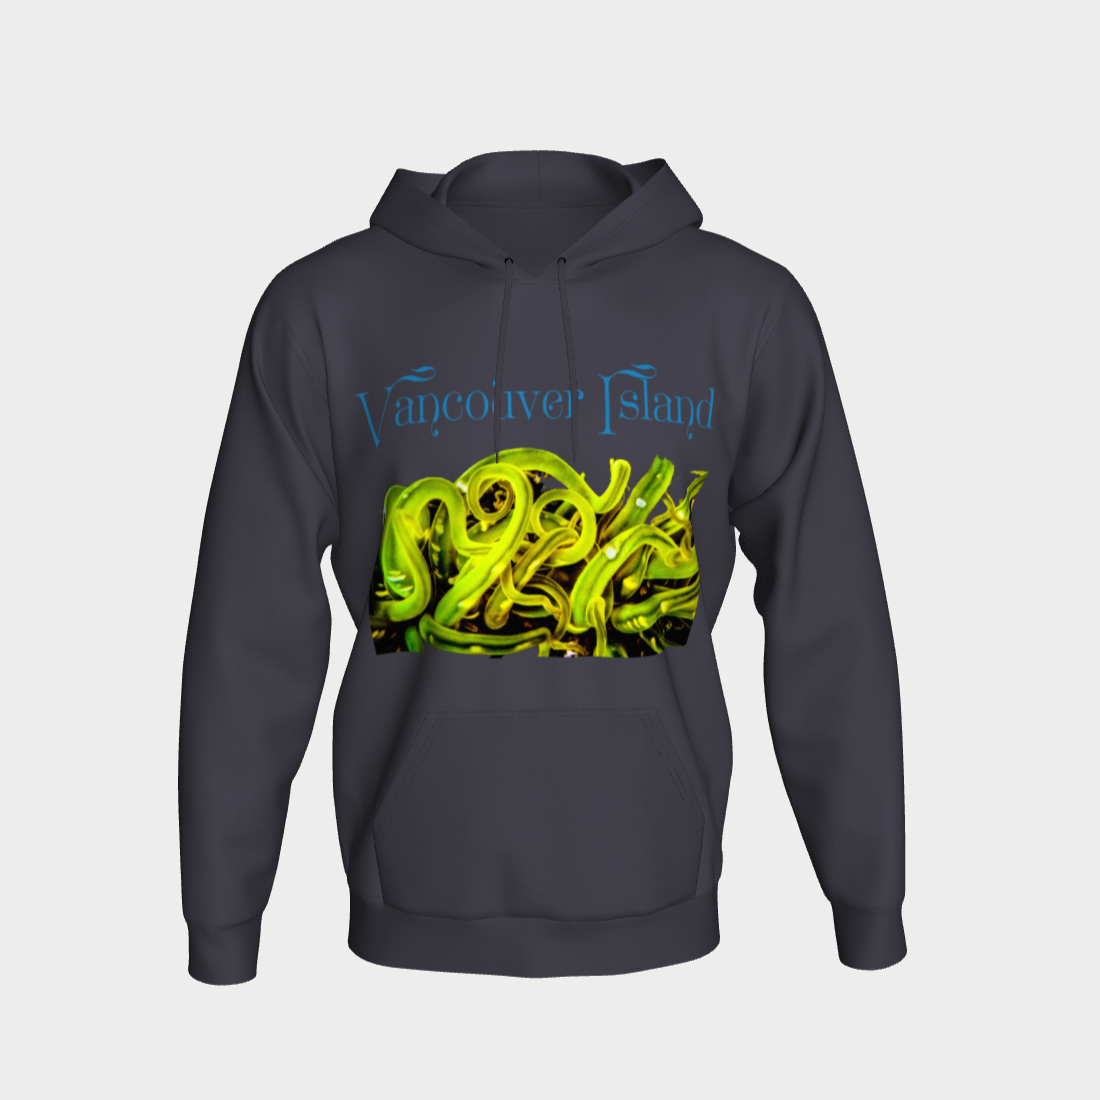 Sea Anemone Vancouver Island (Blue) Unisex Pullover Hoodie Your Van Isle Goddess unisex pullover hoodie is a great classic hoodie!  Created with state of the art tri-tex material which is a non-shrink poly middle encased in two layers of ultra soft cotton face and lining.